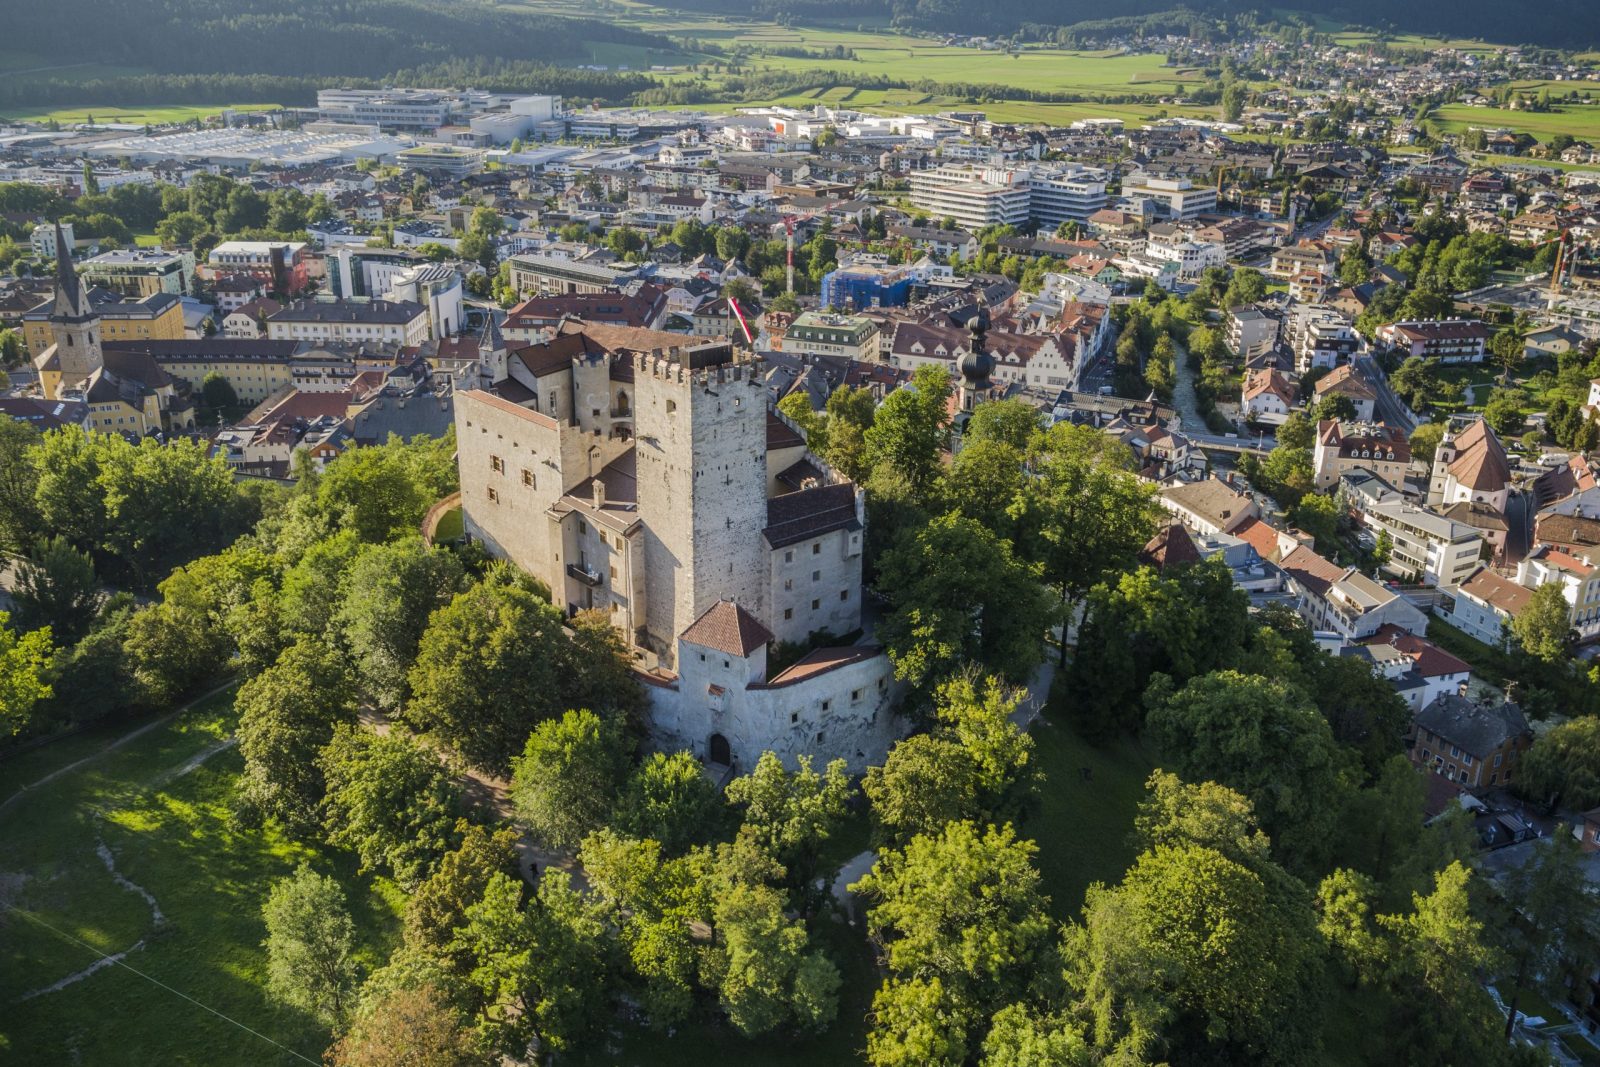 Bruneck Castle. Photo: IDM South Tyrol / Harald Wisthaler. A Must-Read Guide to Summer in South Tyrol. Brunico was chosen the happiest small town in Italy in 2009.